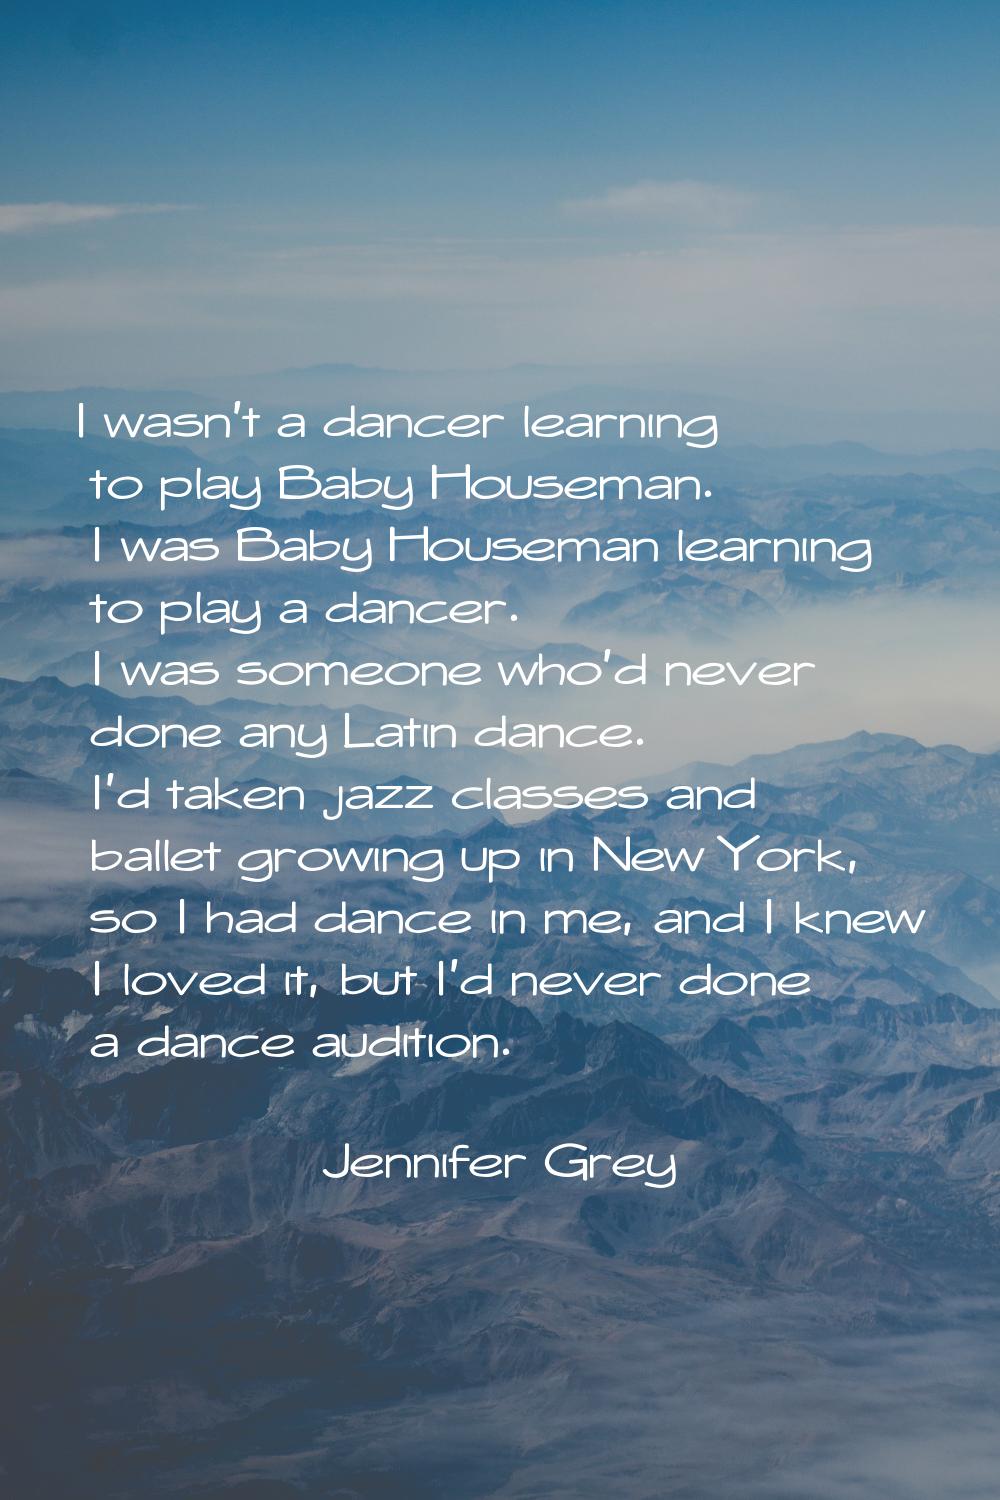 I wasn't a dancer learning to play Baby Houseman. I was Baby Houseman learning to play a dancer. I 